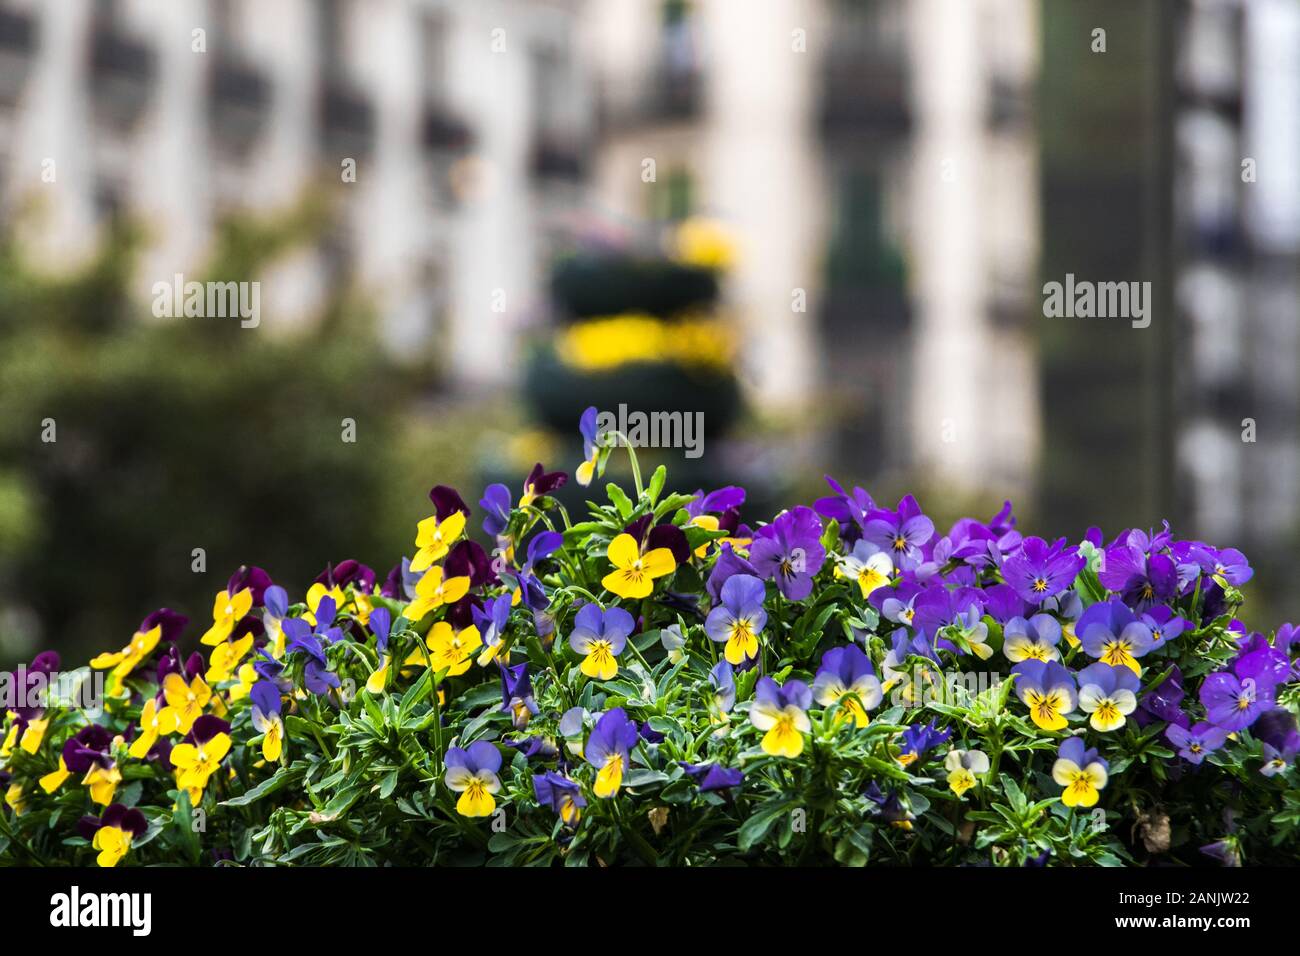 Flower pot with a building in the background Stock Photo